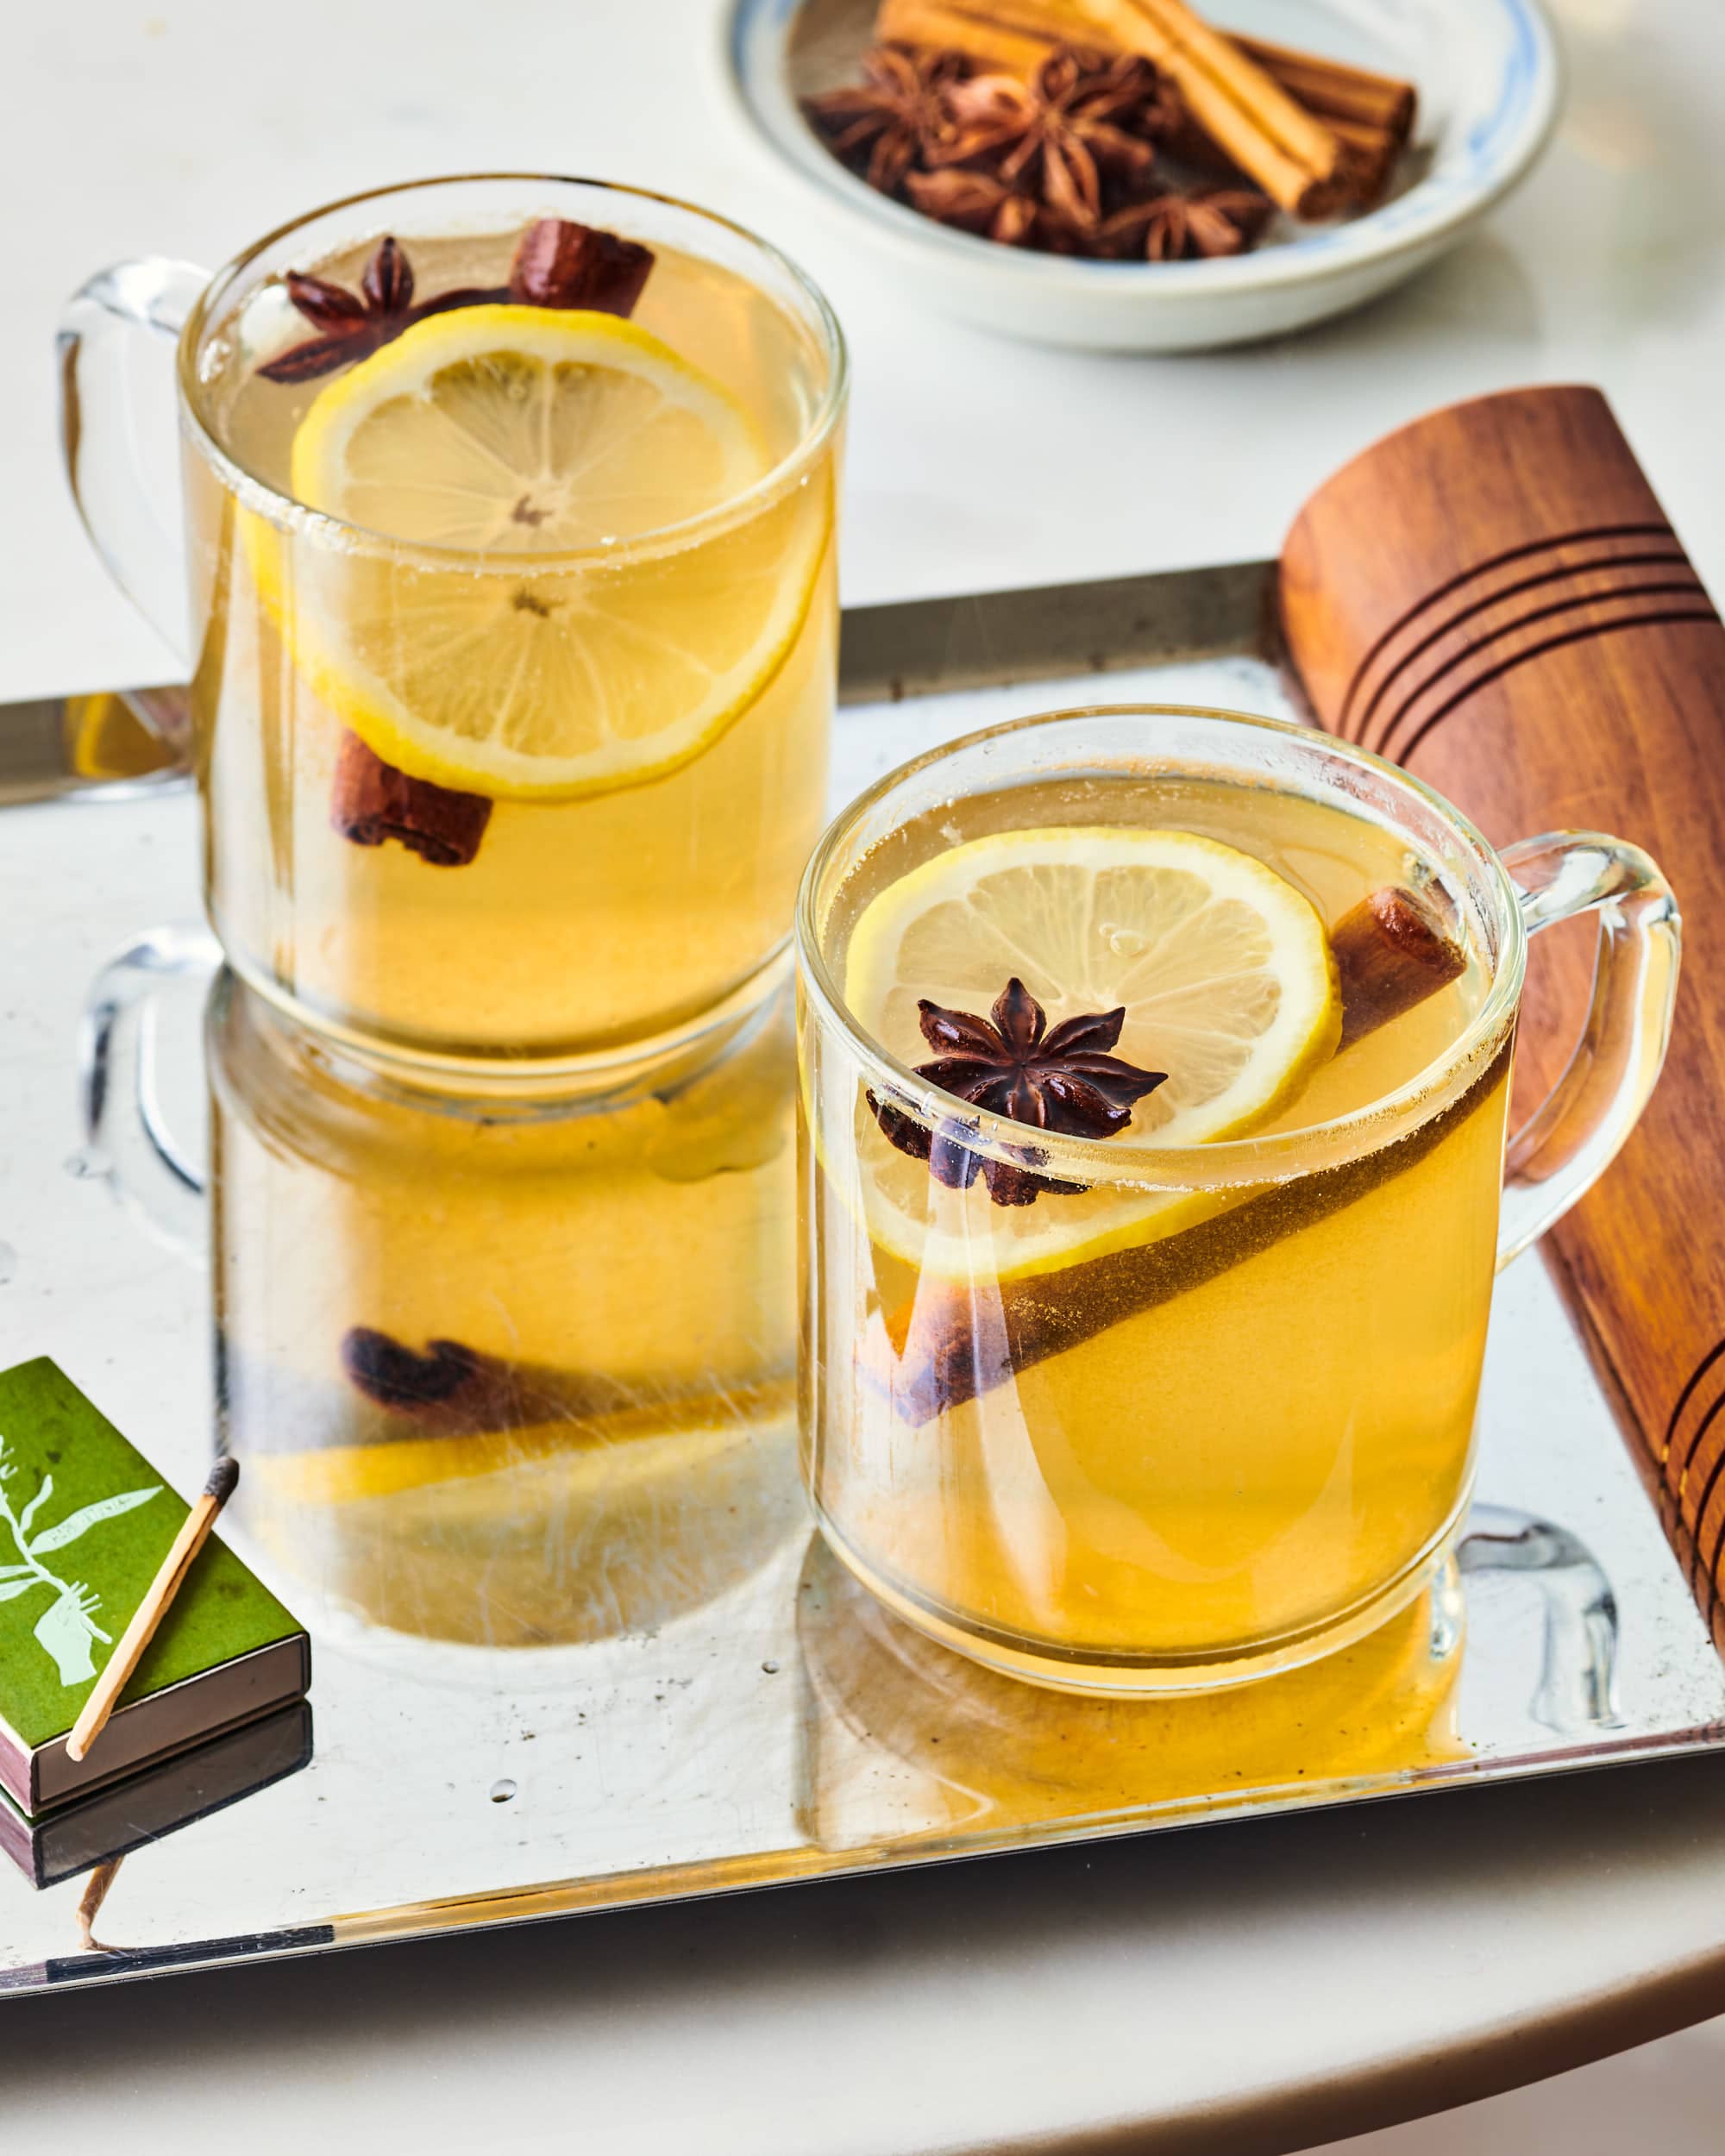 How to Make a Classic Hot Toddy